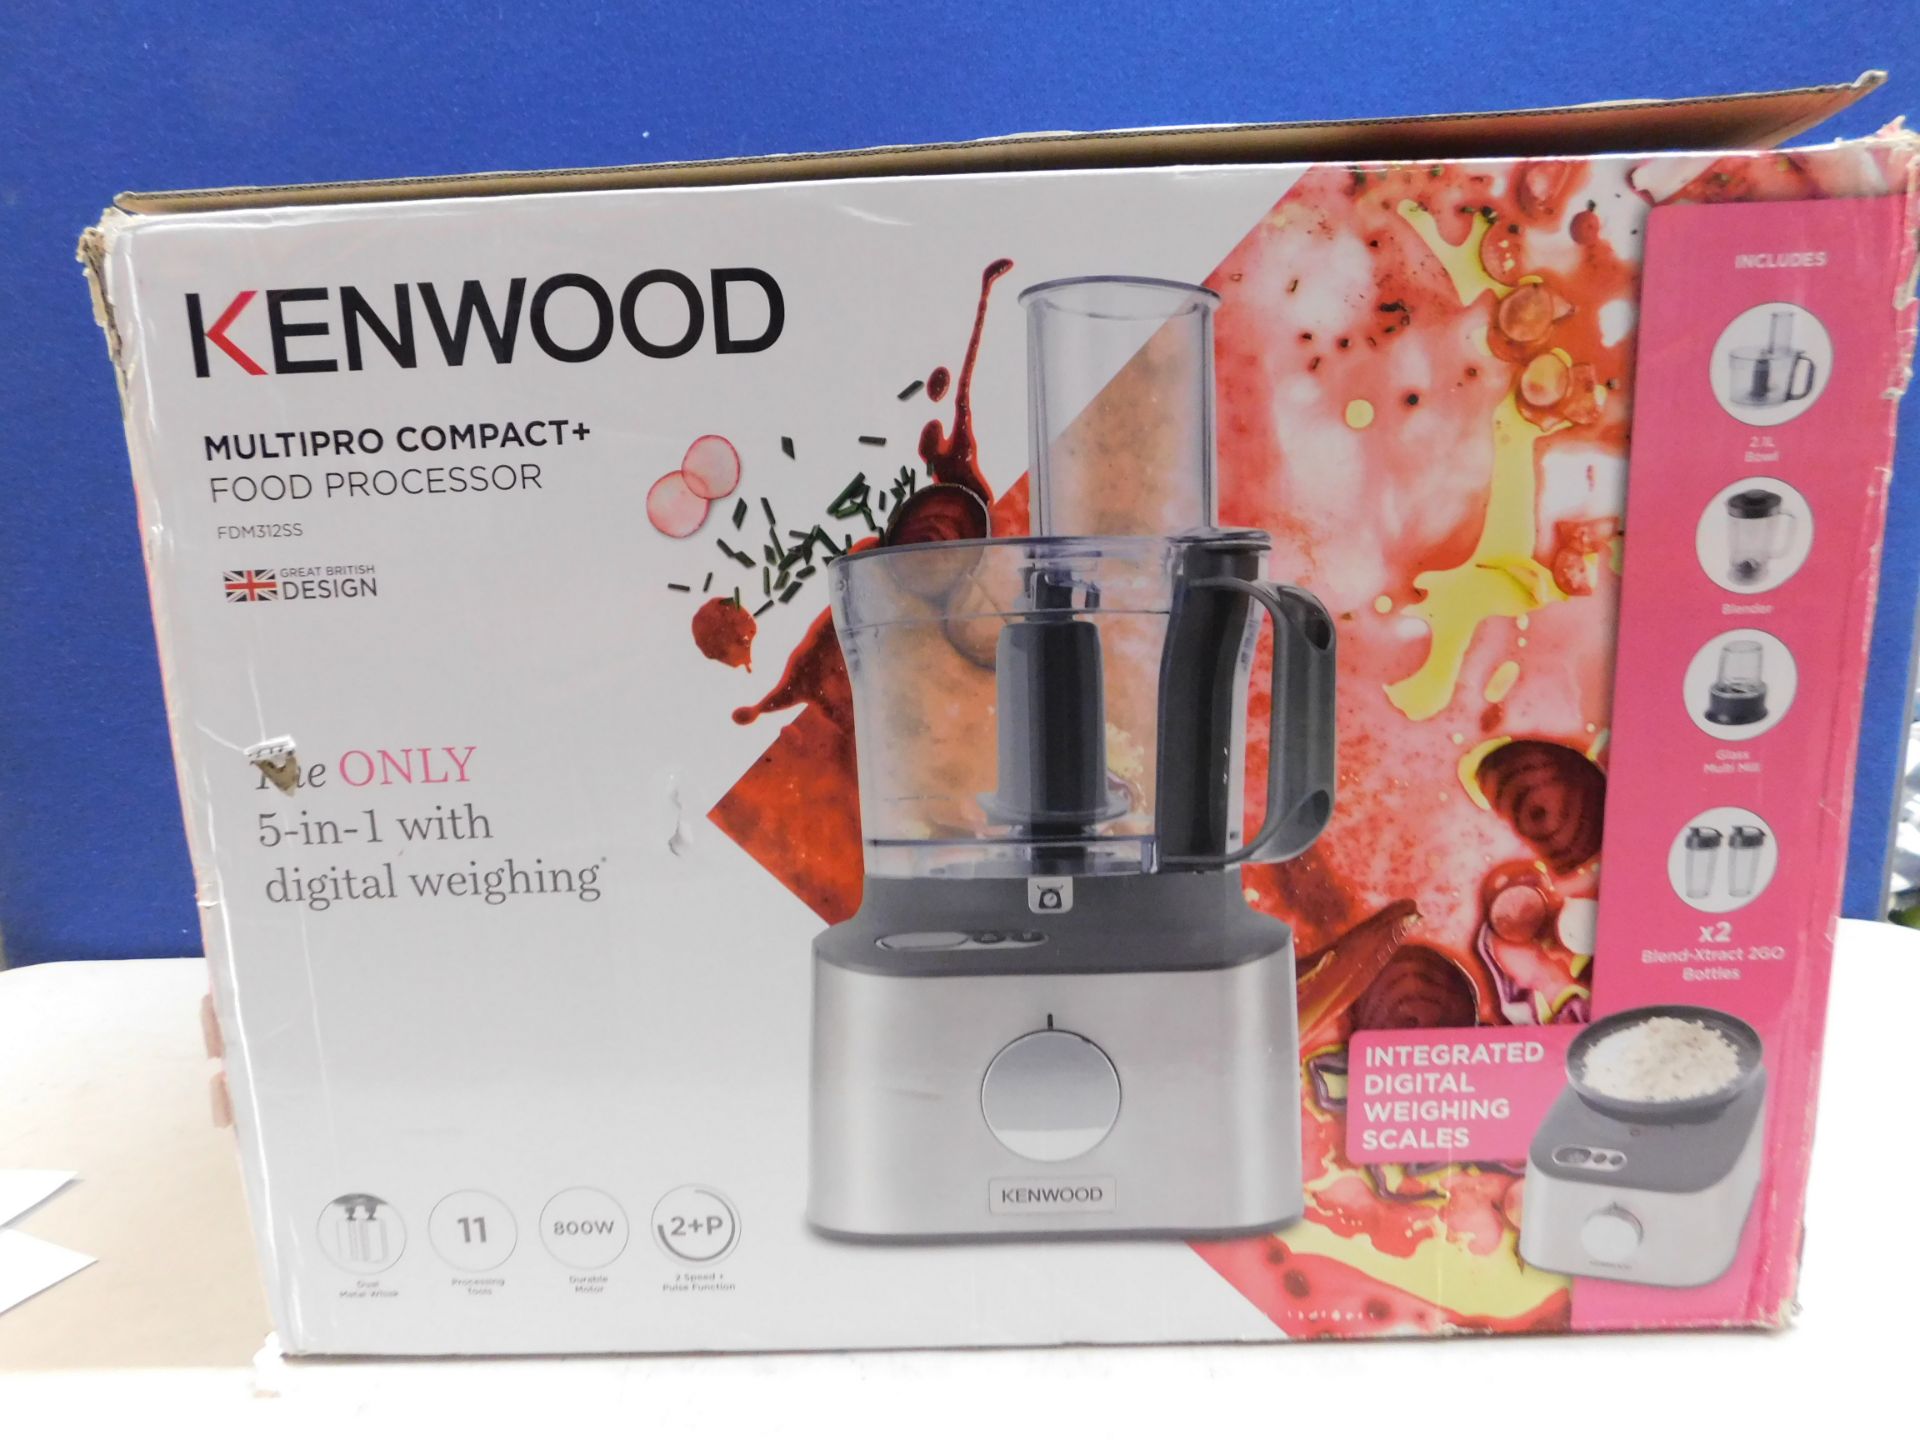 1 BOXED KENWOOD FDM312SS MULTIPRO COMPACT+ FOOD PROCESSOR Â£179 (GOOD CONDTION WORKING MISSING FEW